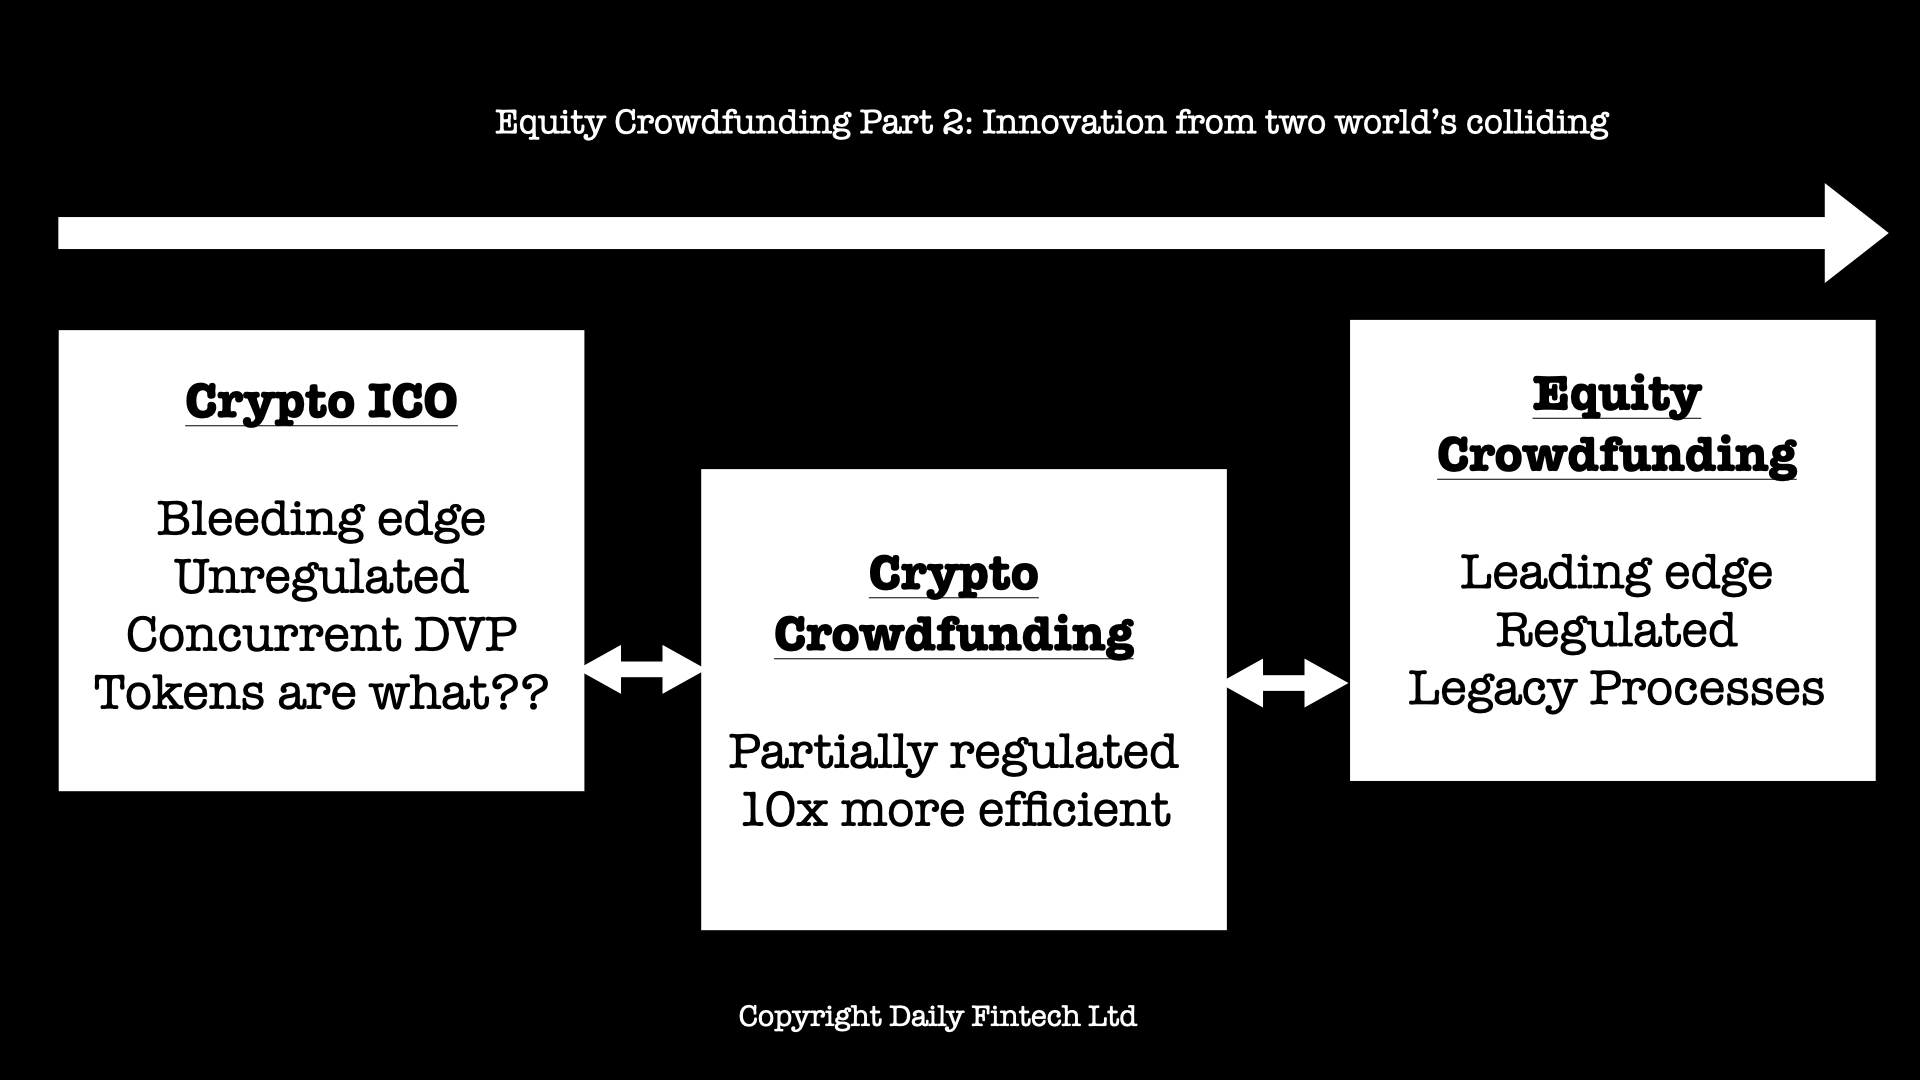 Equity Crowdfunding Part 2: Innovation from two world’s ...